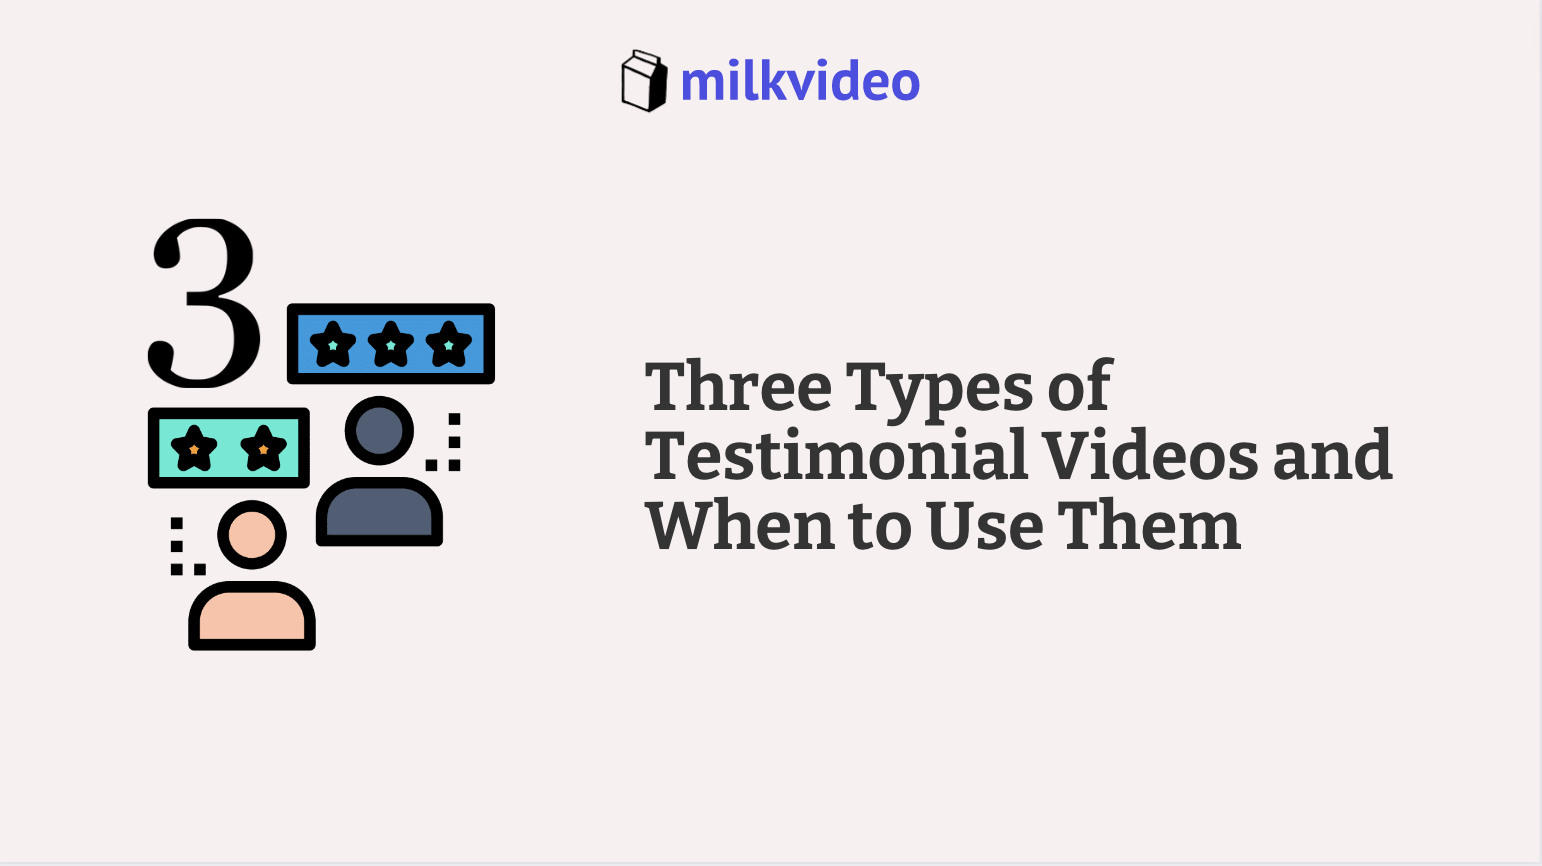 Three Types of Testimonial Videos and When to Use Them